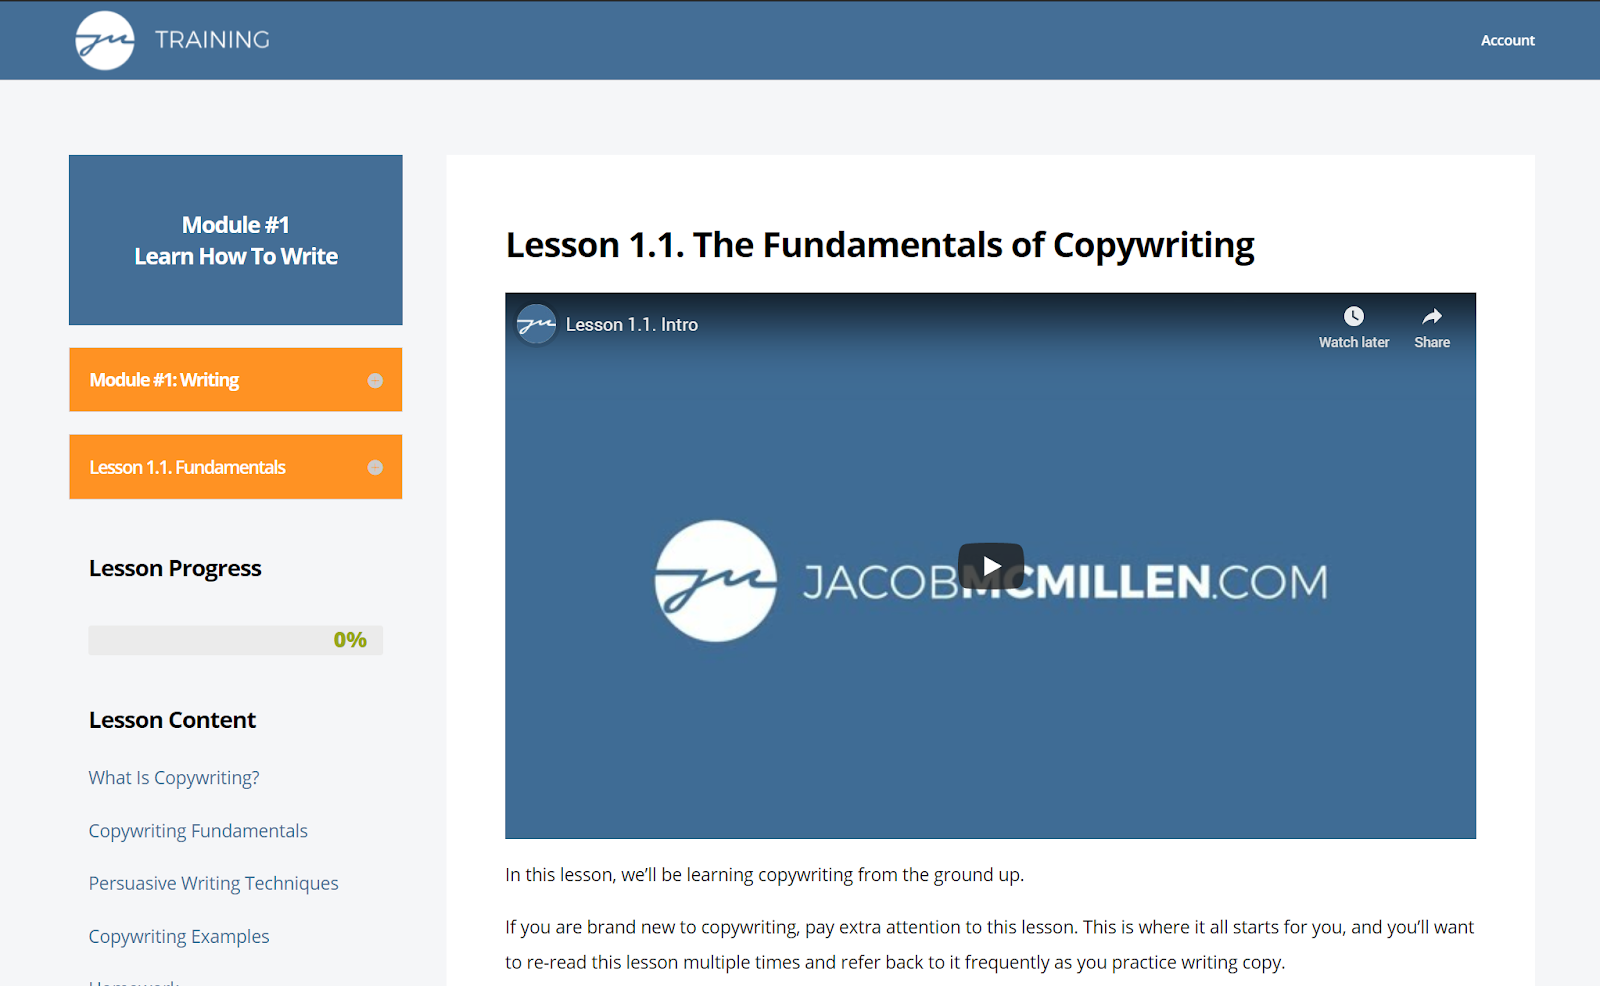 Jacob McMillen: Lesson 1.1- The Fundamentals of Copywriting